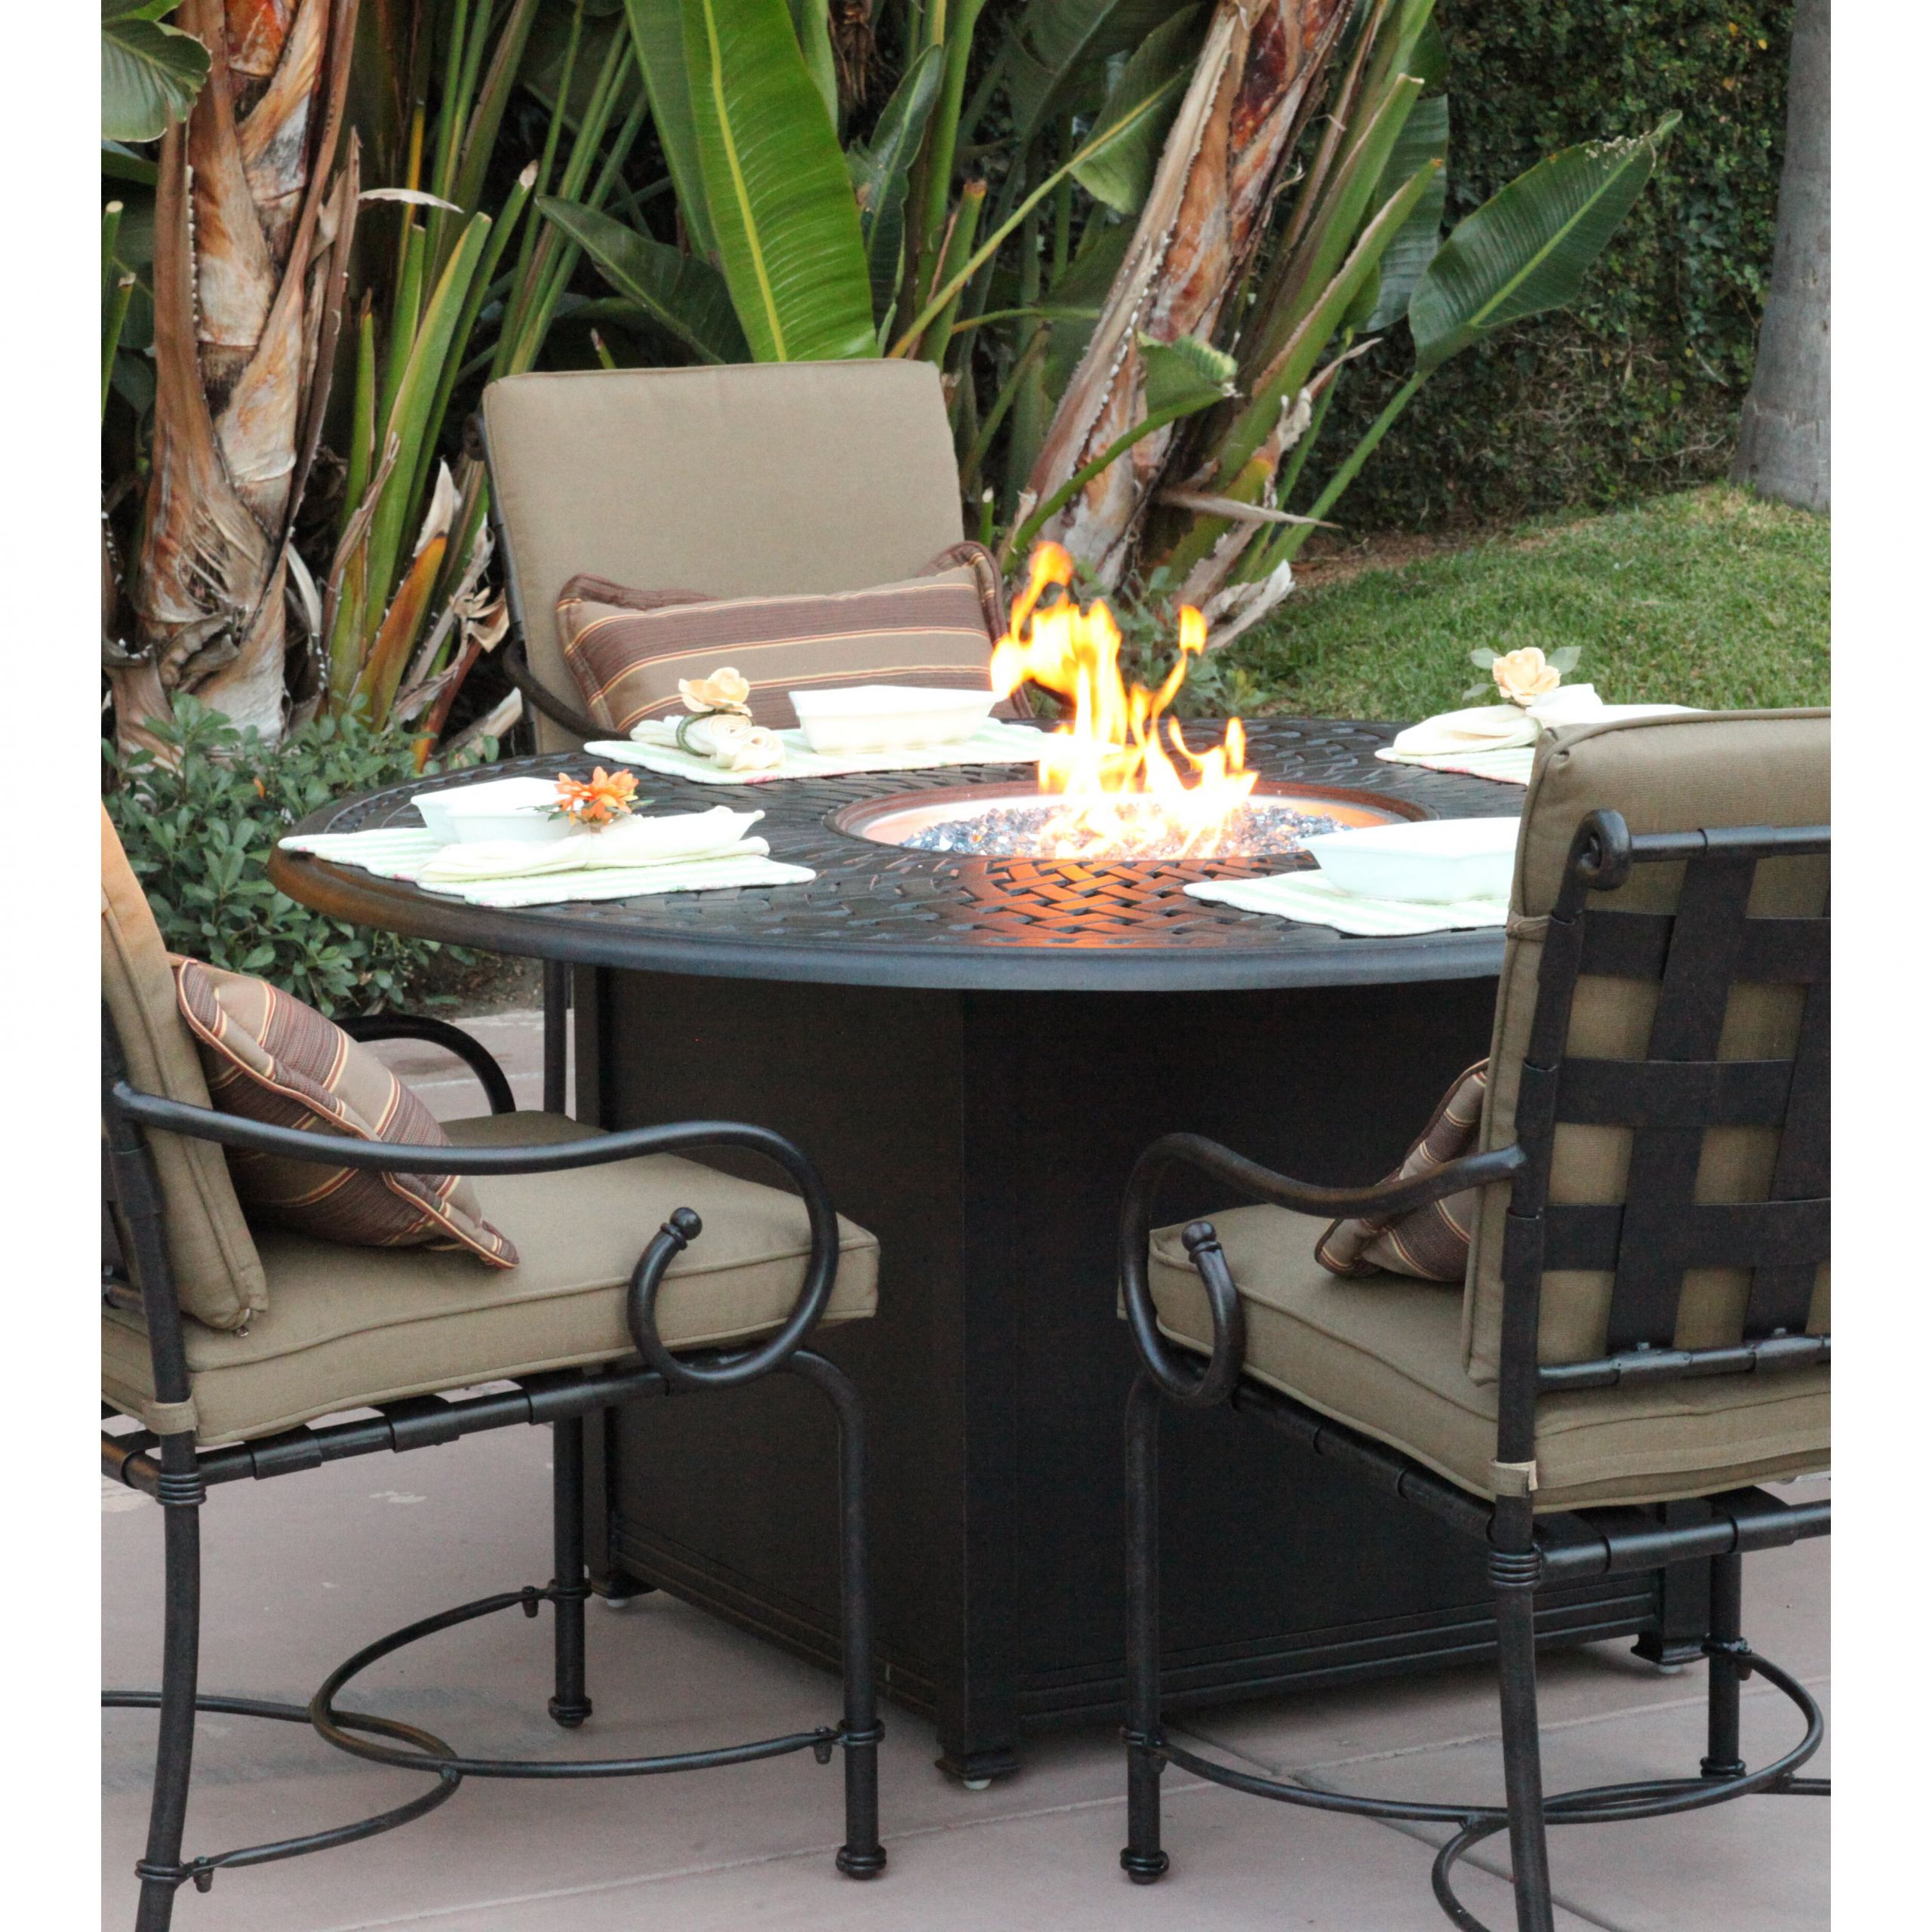 Patio Table With Fire Pit
 Darlee Series 60 Fire Pit Table & Reviews